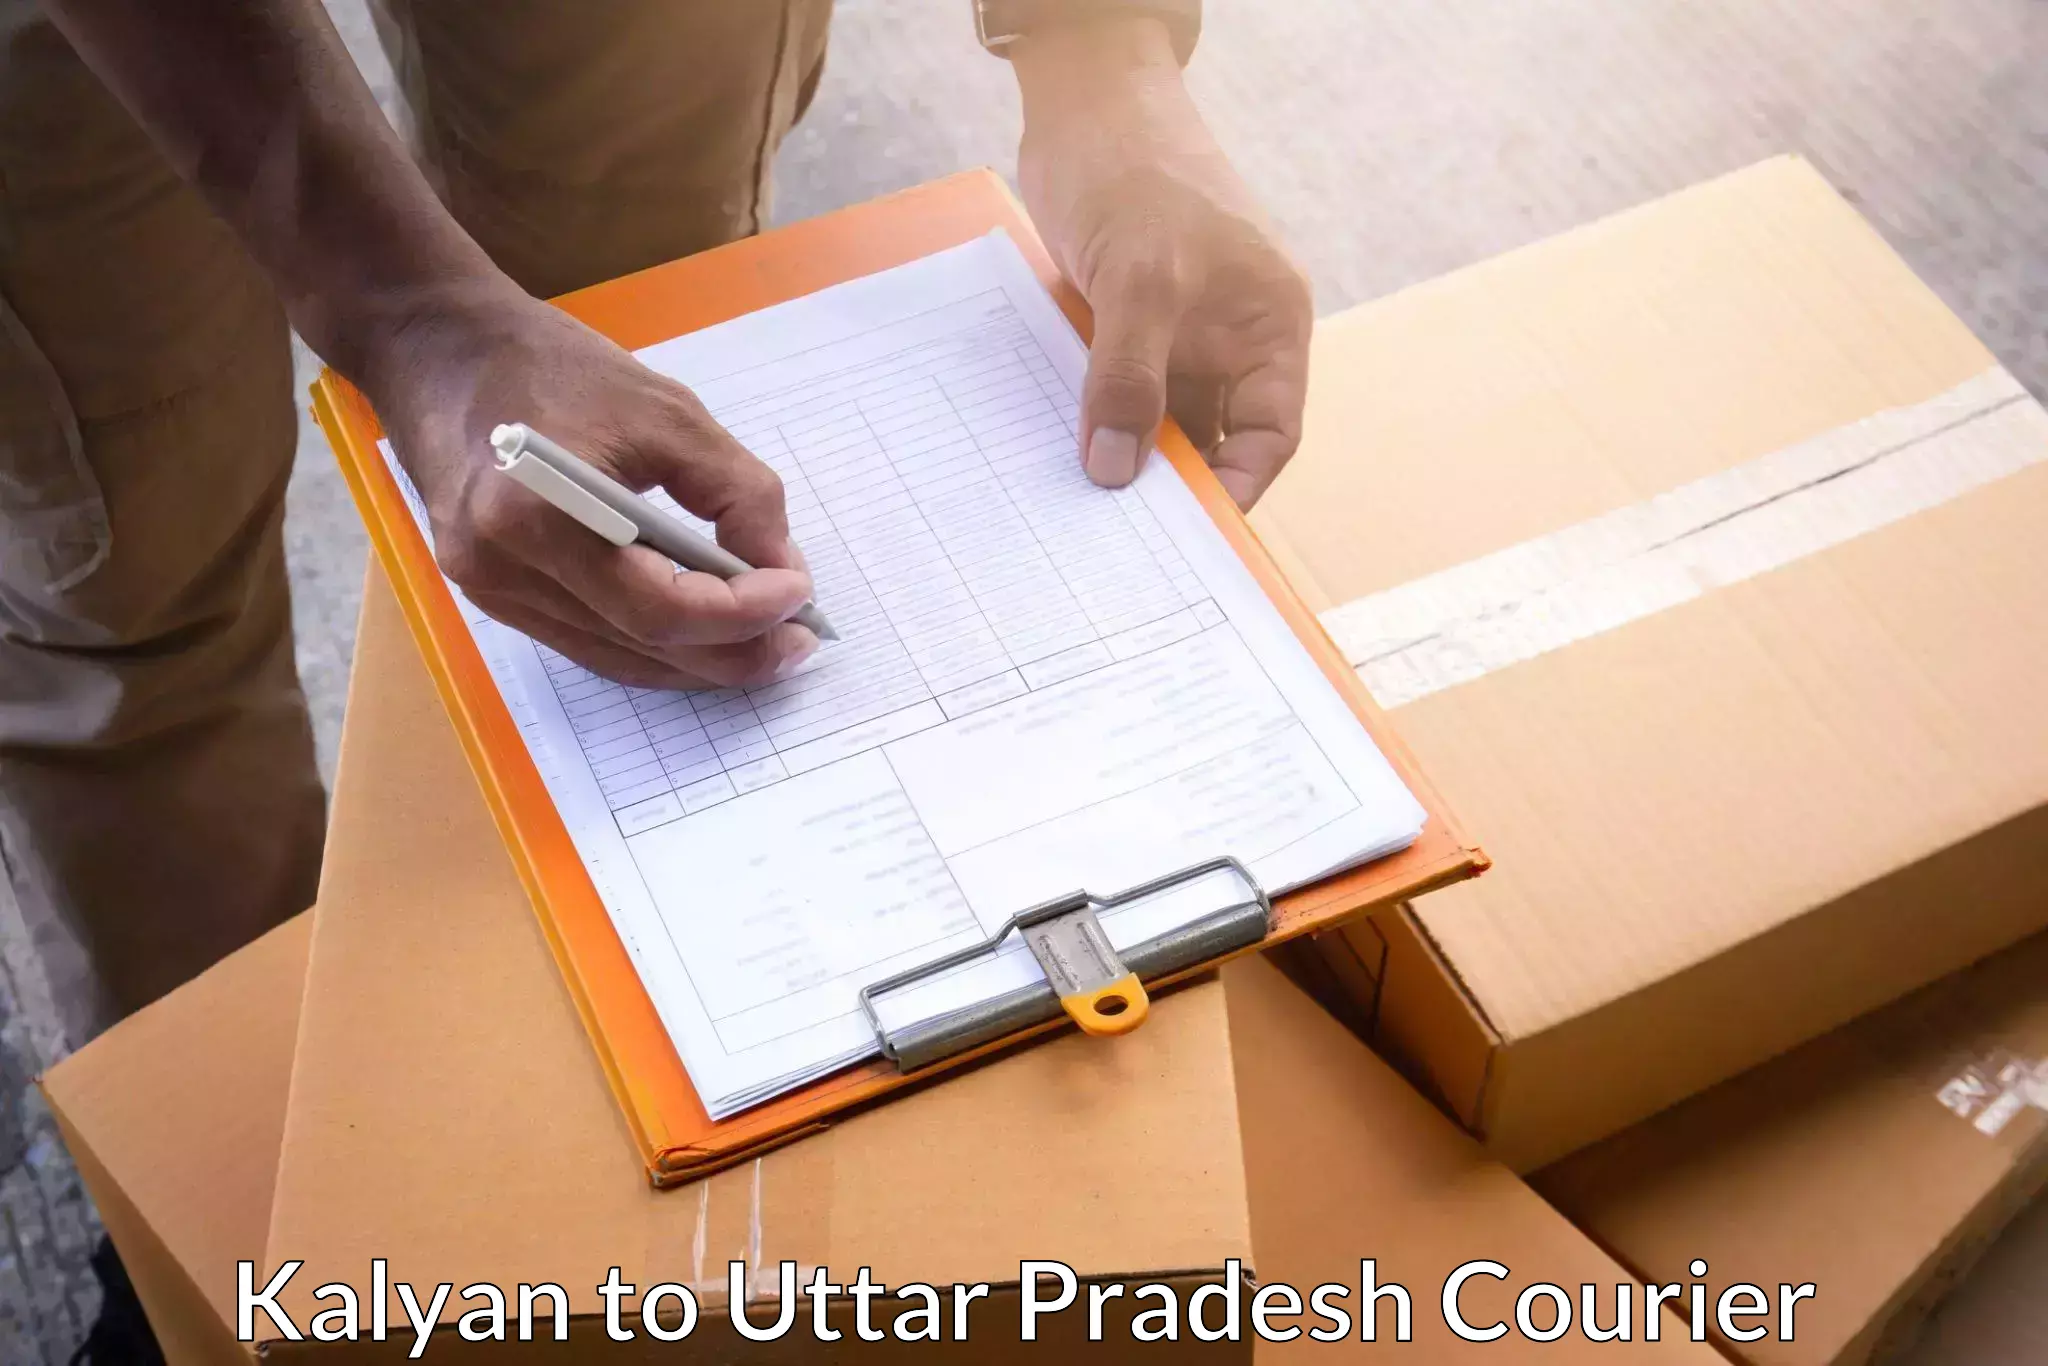 Full-service courier options Kalyan to Mohammadabad